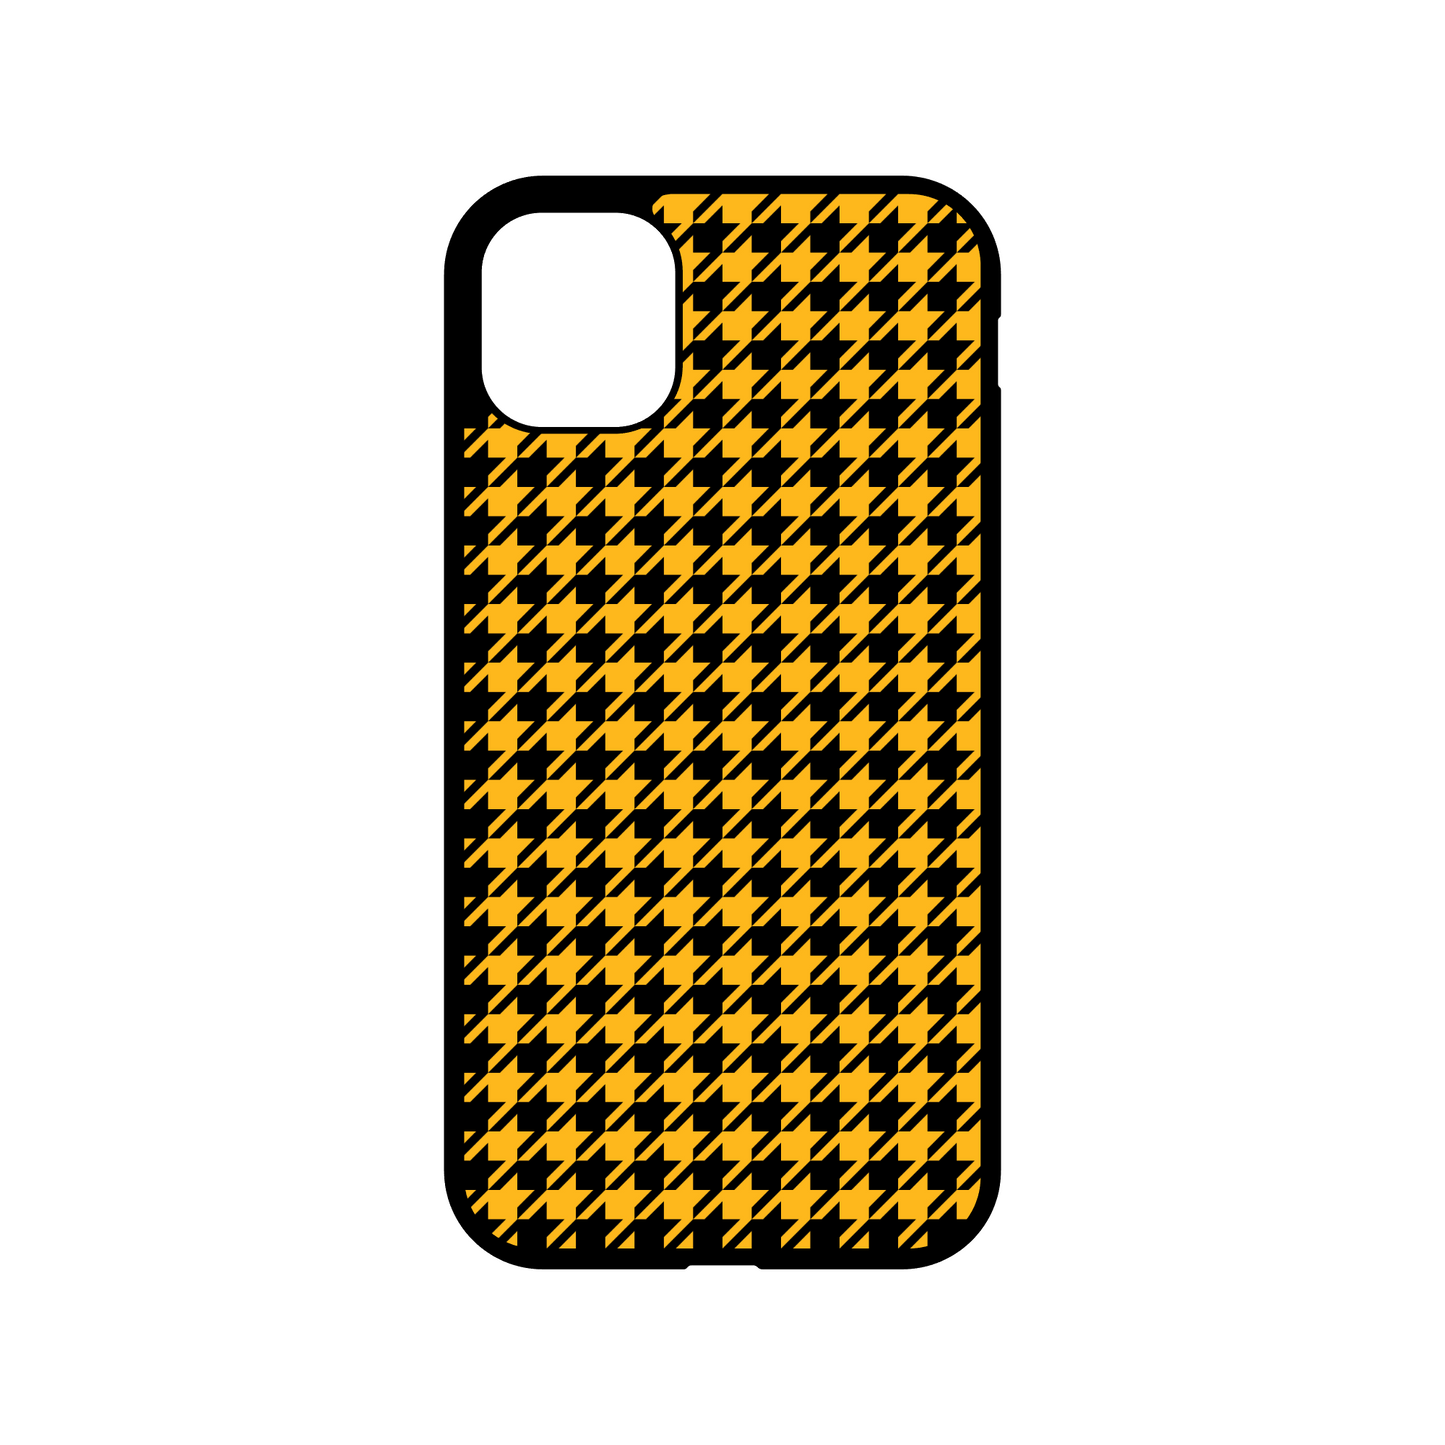 Black & Gold Houndstooth Cell Phone Case